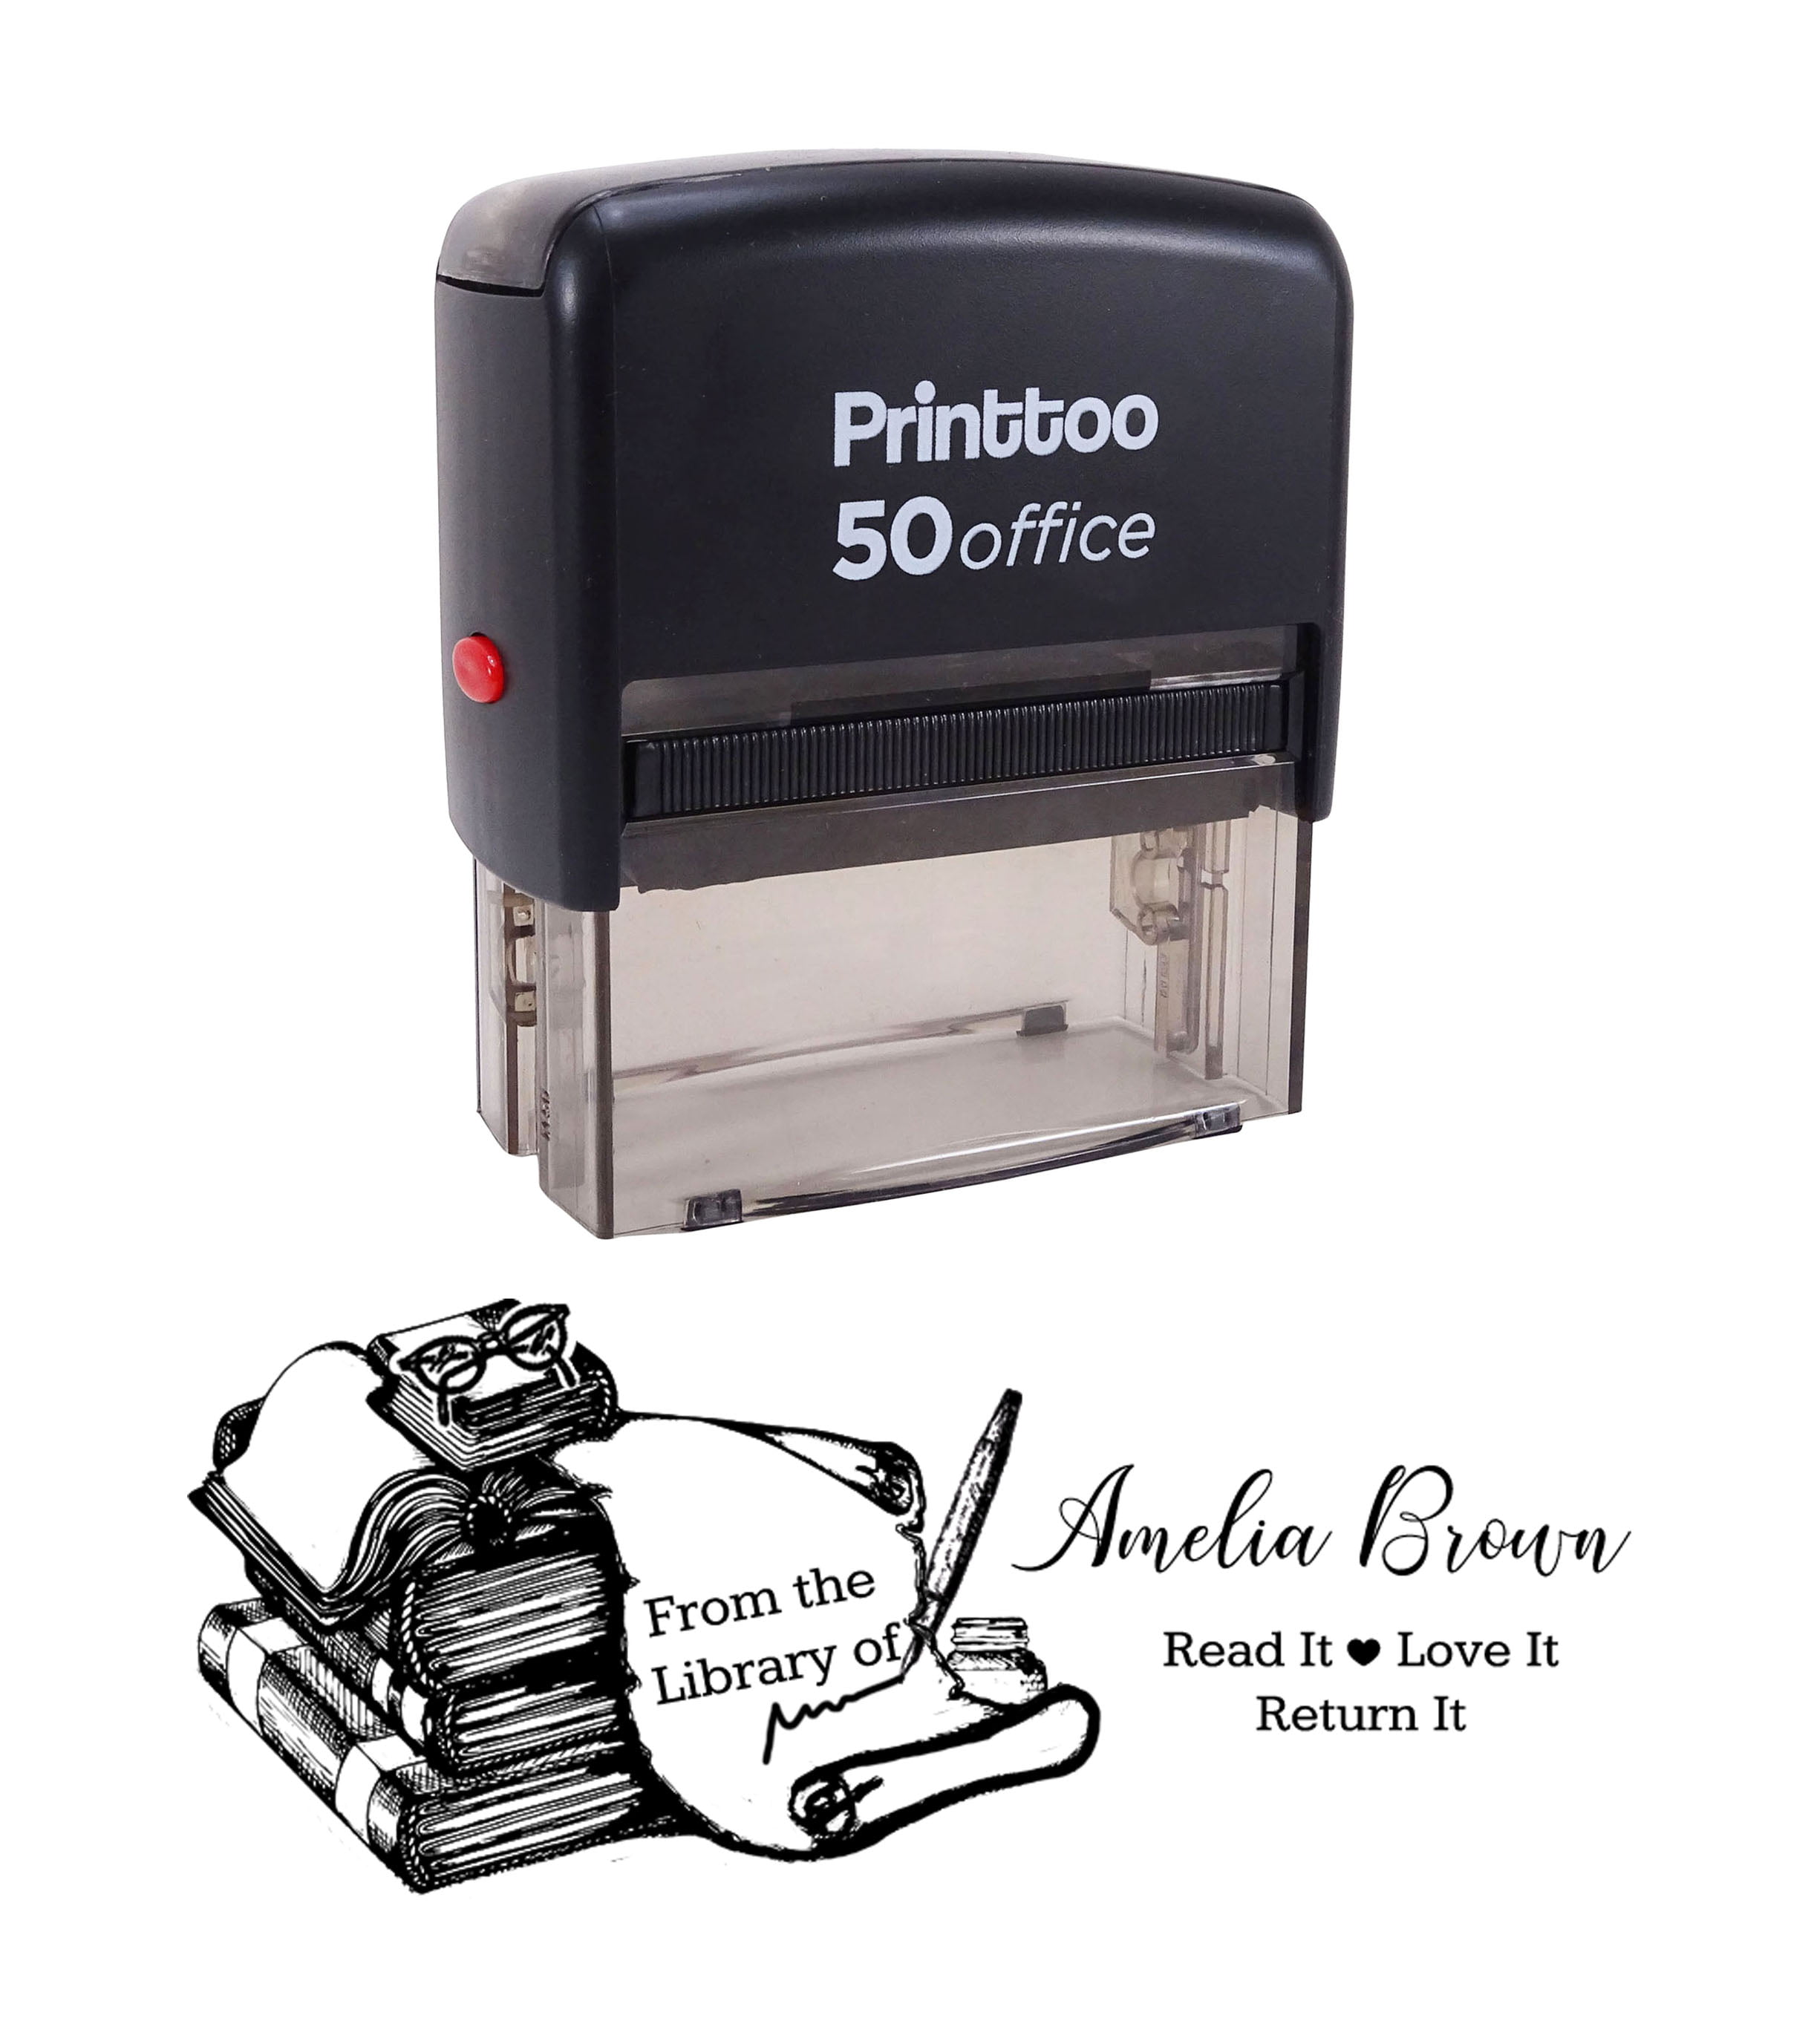 Printtoo Personalized Black Self Inking Hugs And Kisses Stamp Custom  Wedding Favor Rubber Stamper-60 x 40 mm 